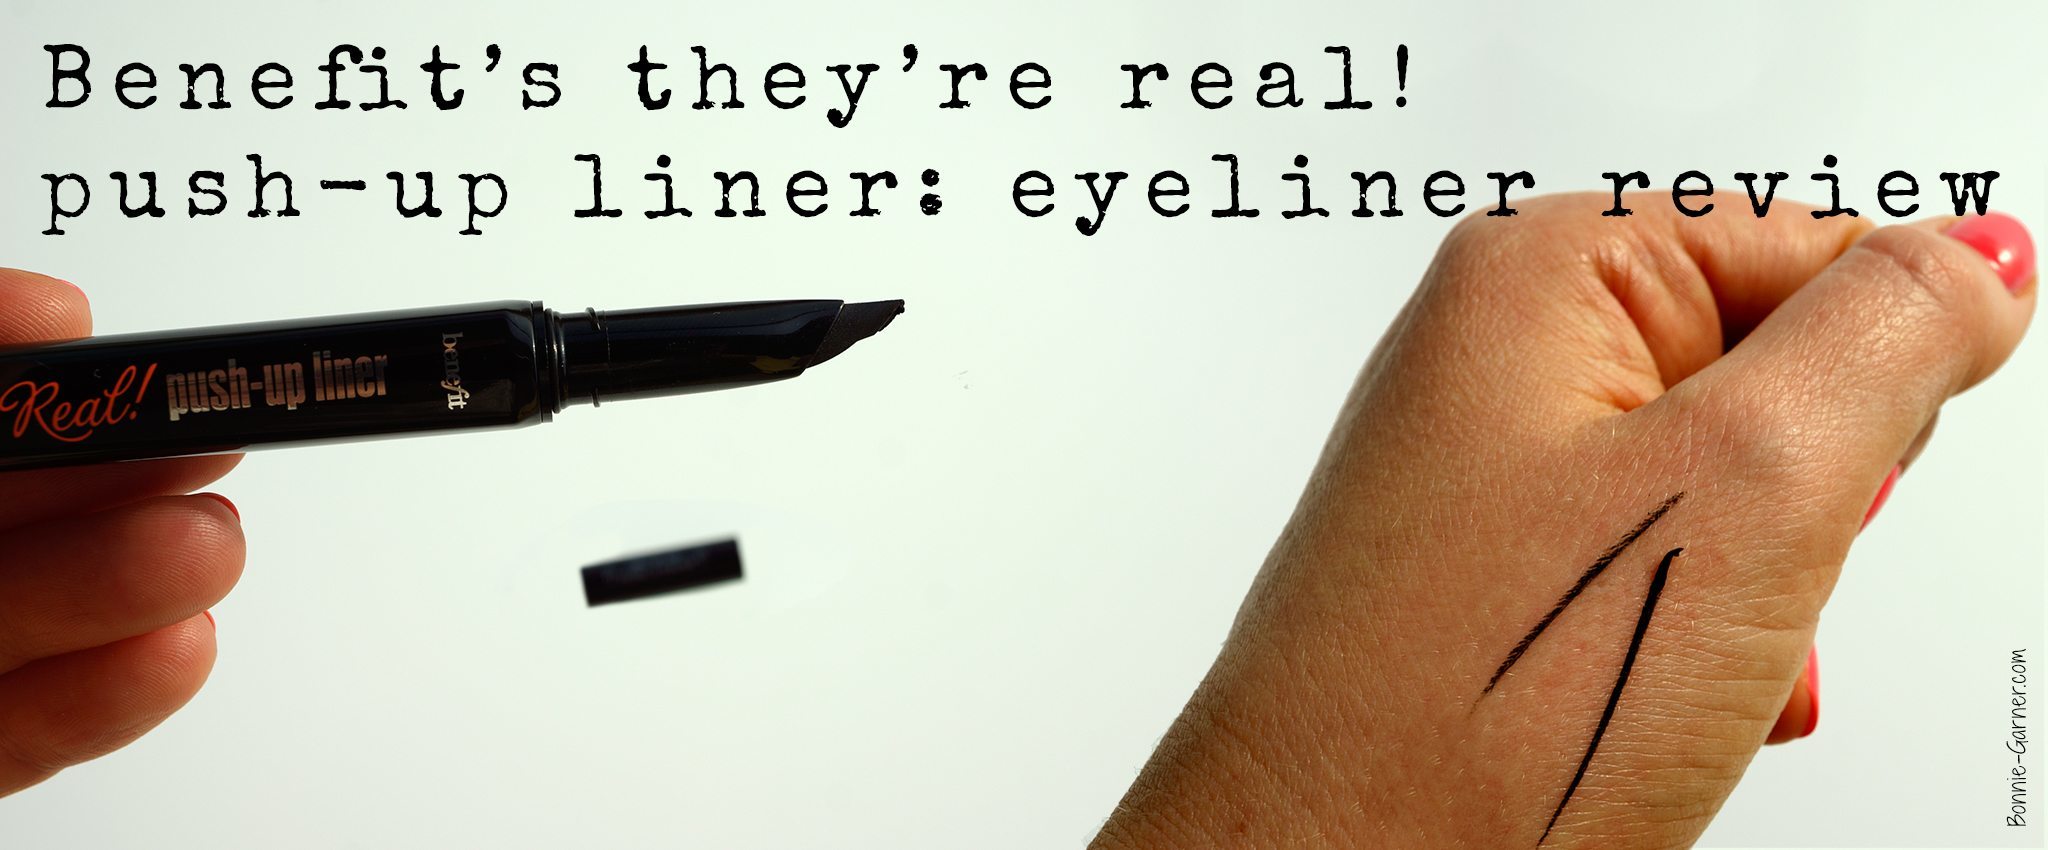 Benefit’s they’re real! push-up liner: eyeliner review